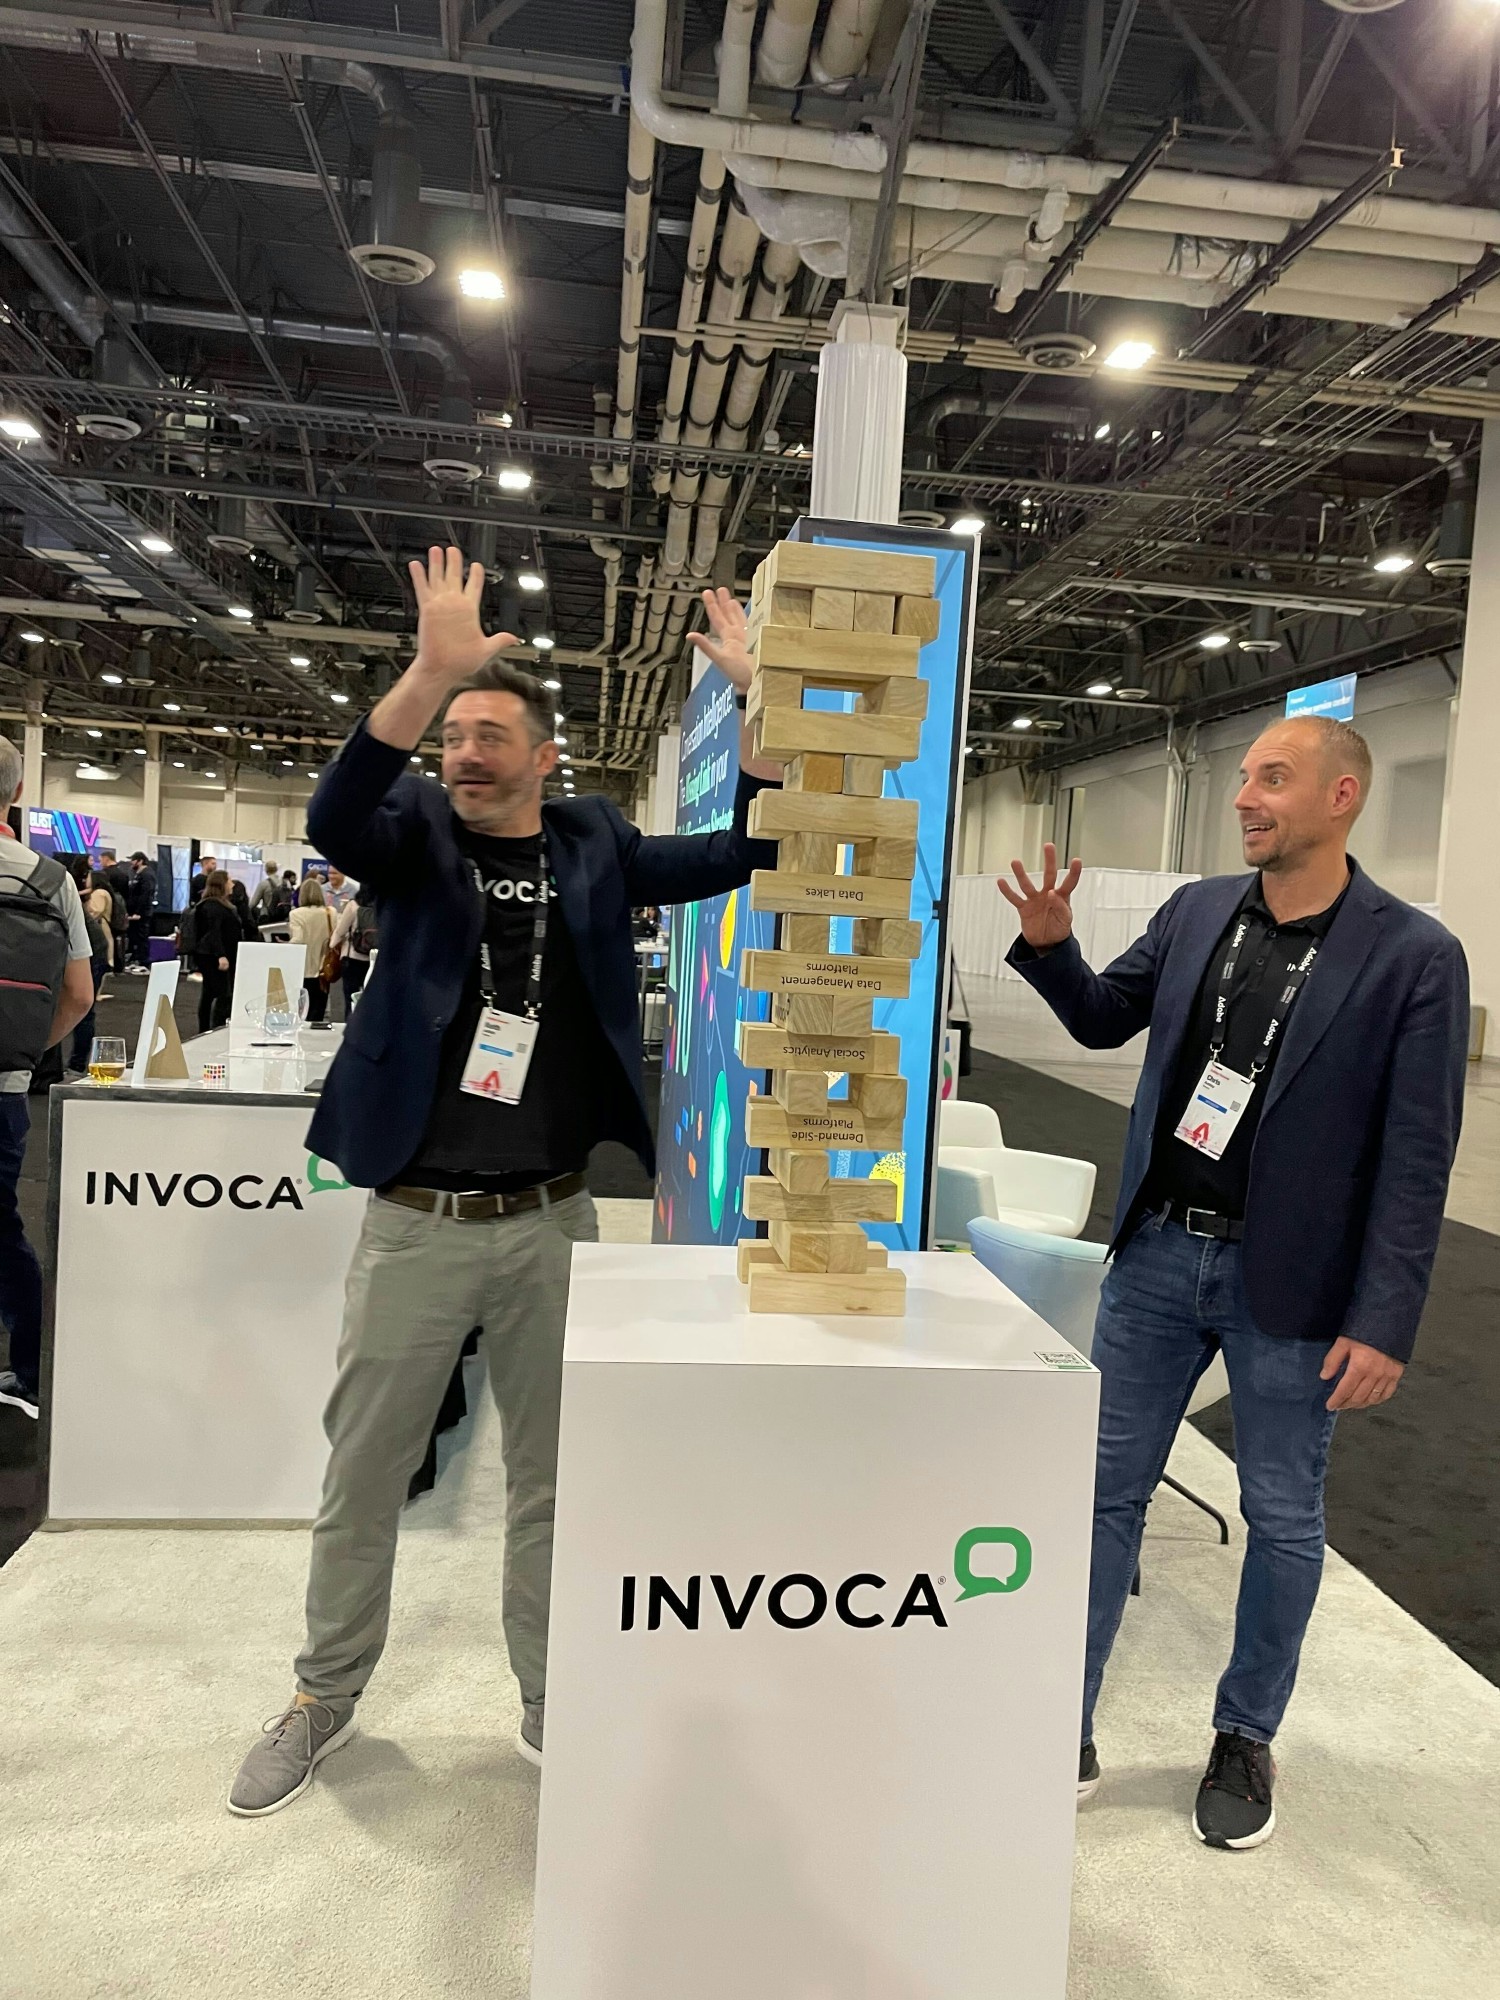 Invoca at an industry event.